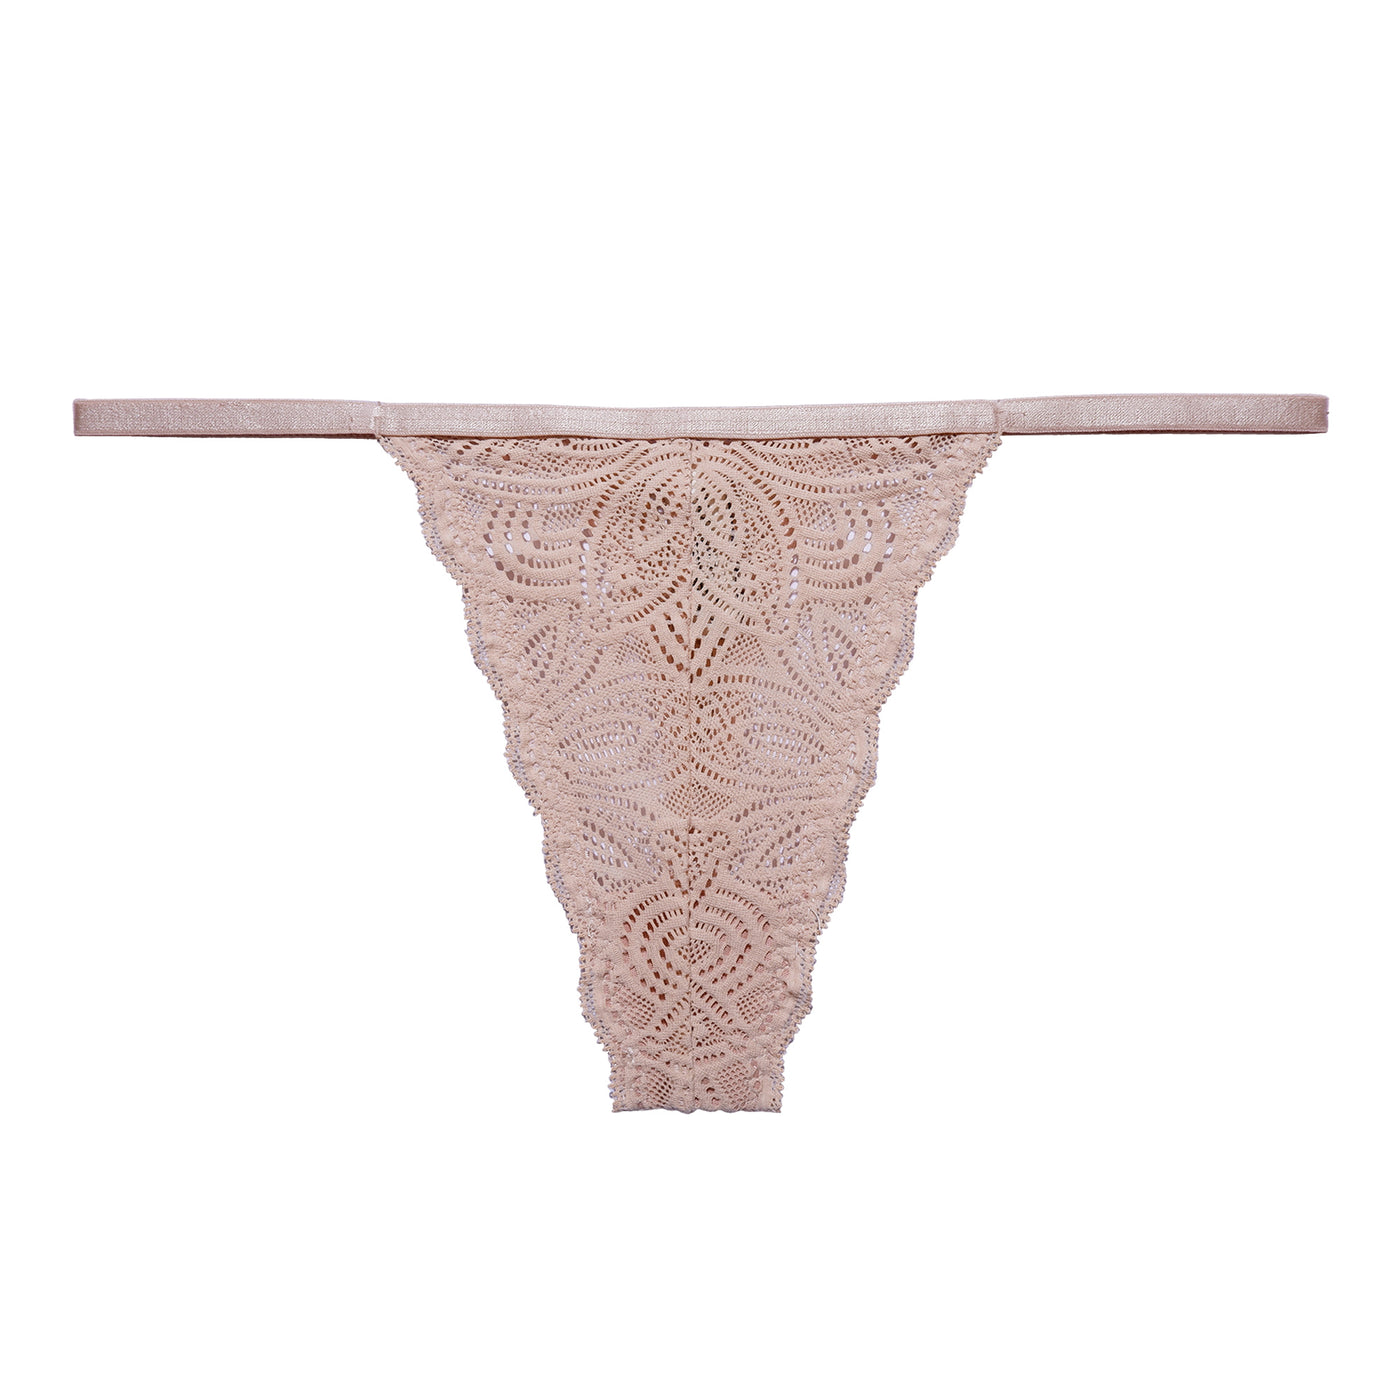 Our beautiful Luna String is made in soft recycled nylon lace with delicate scalloped edges paired with a thin waist elastic